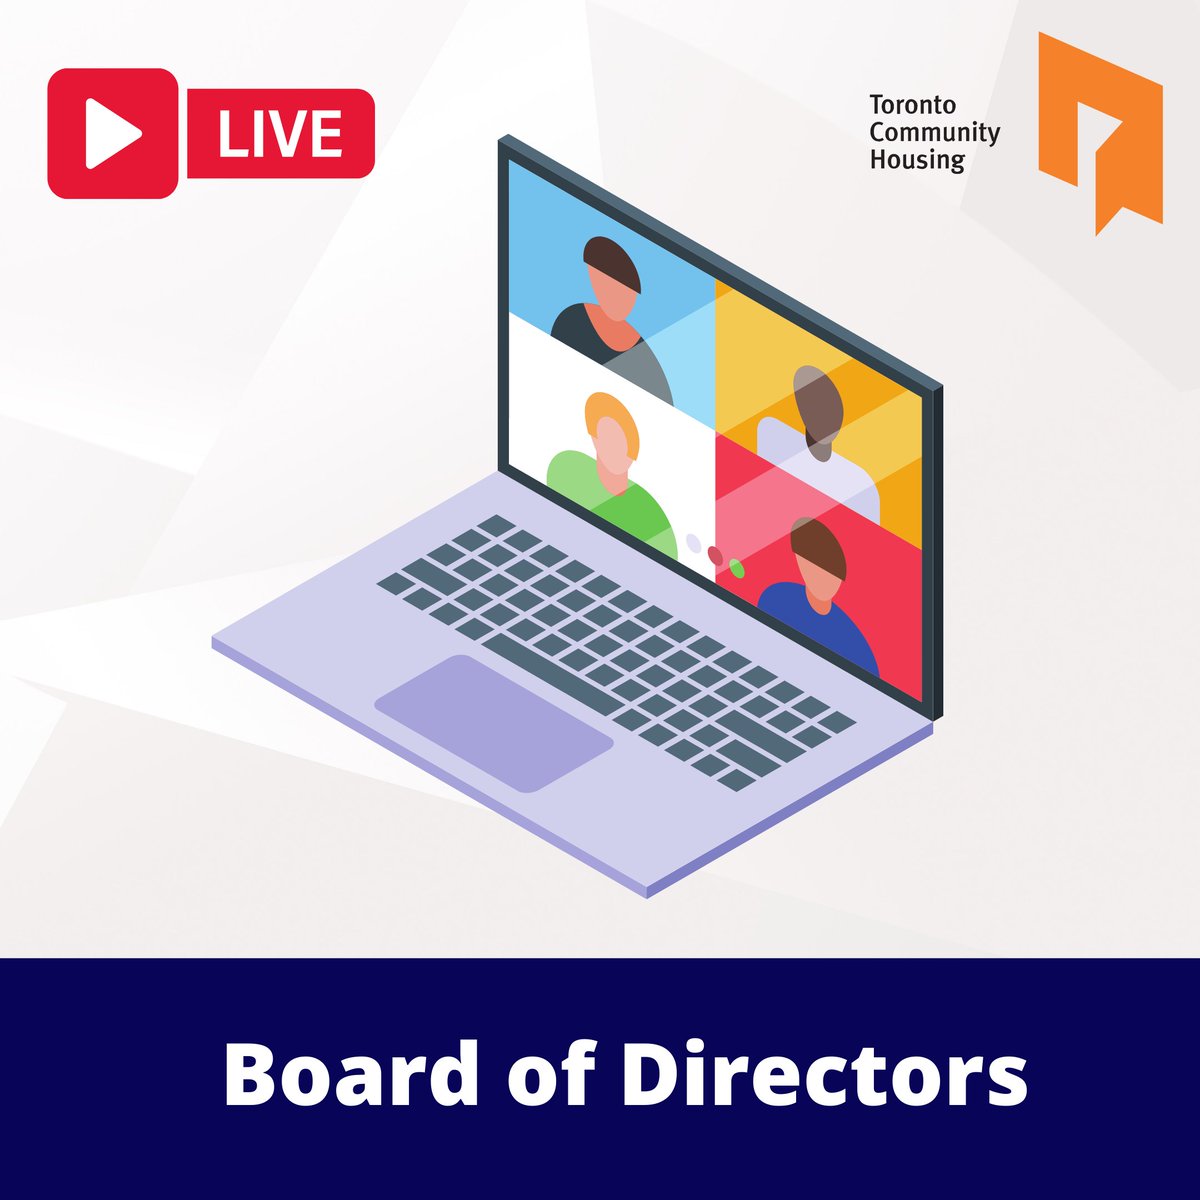 Reminder 🔔
You can watch today's meeting of the #TCHC Board live on YouTube: bit.ly/3w6ClqL